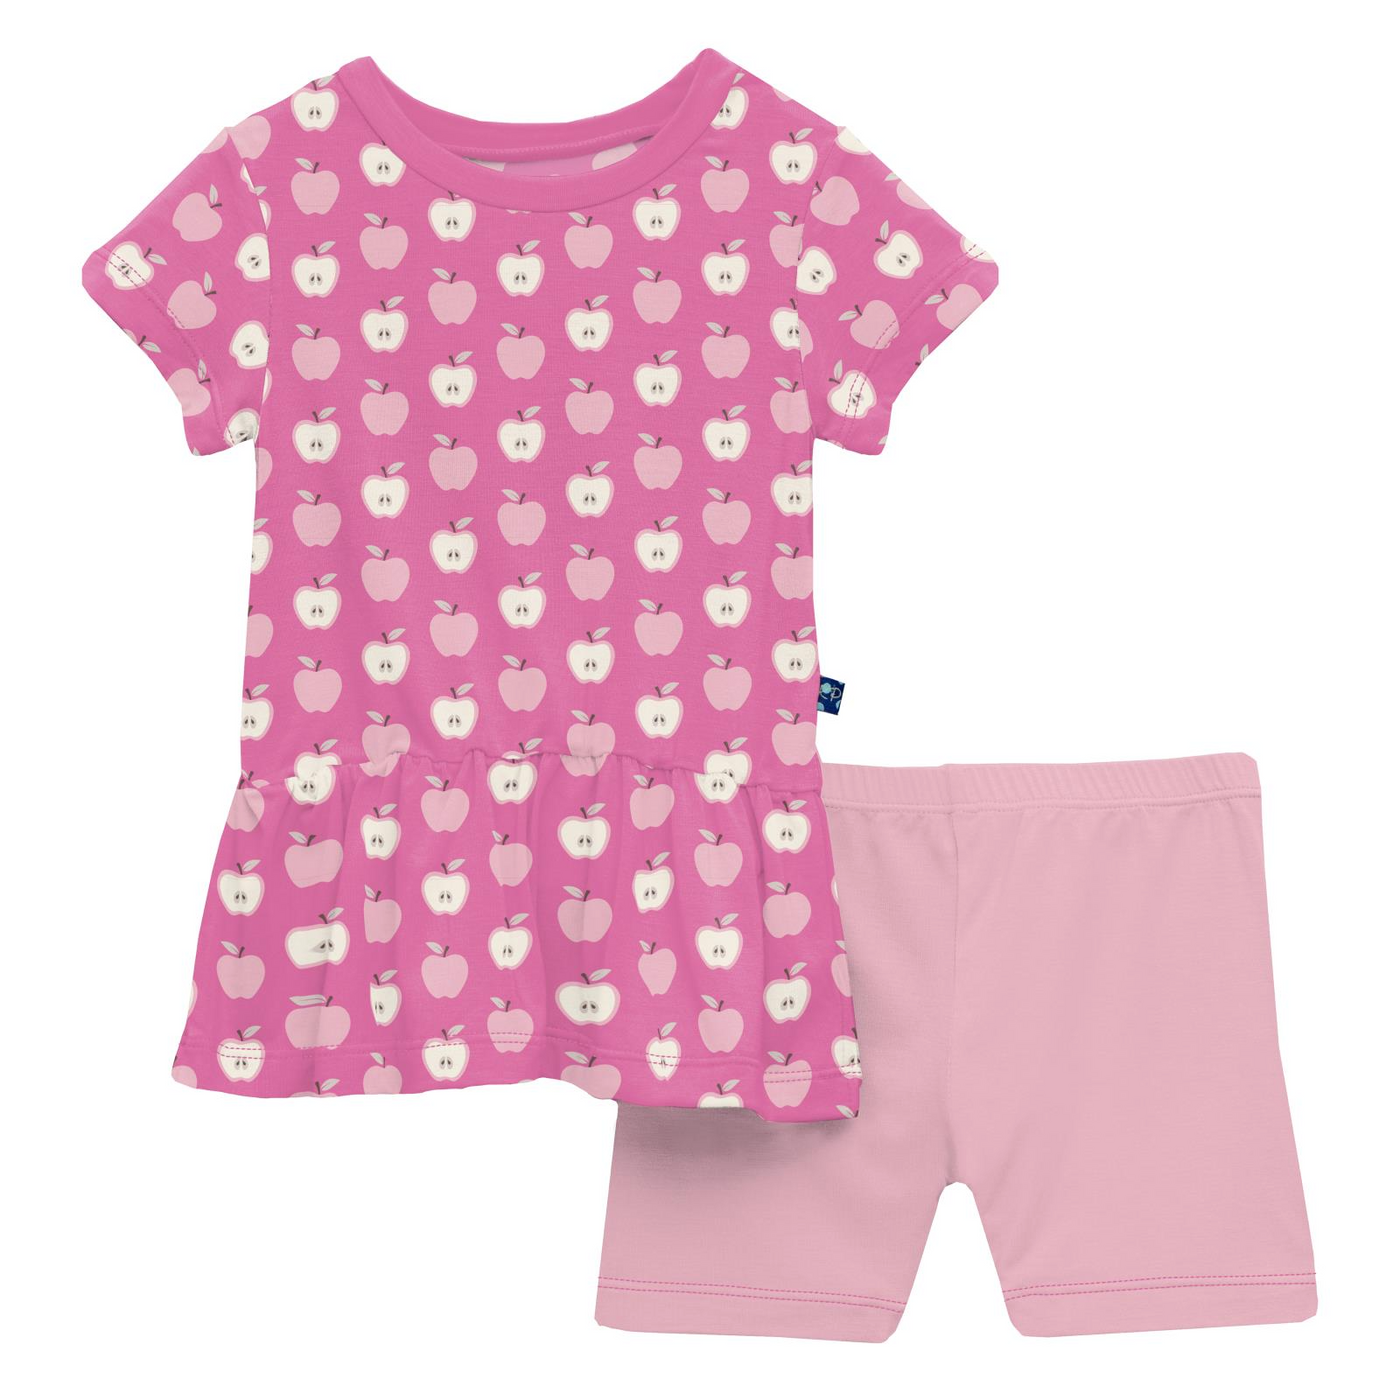 Kickee Pants Playtime Outfit Set: Tulip Johnny Appleseed